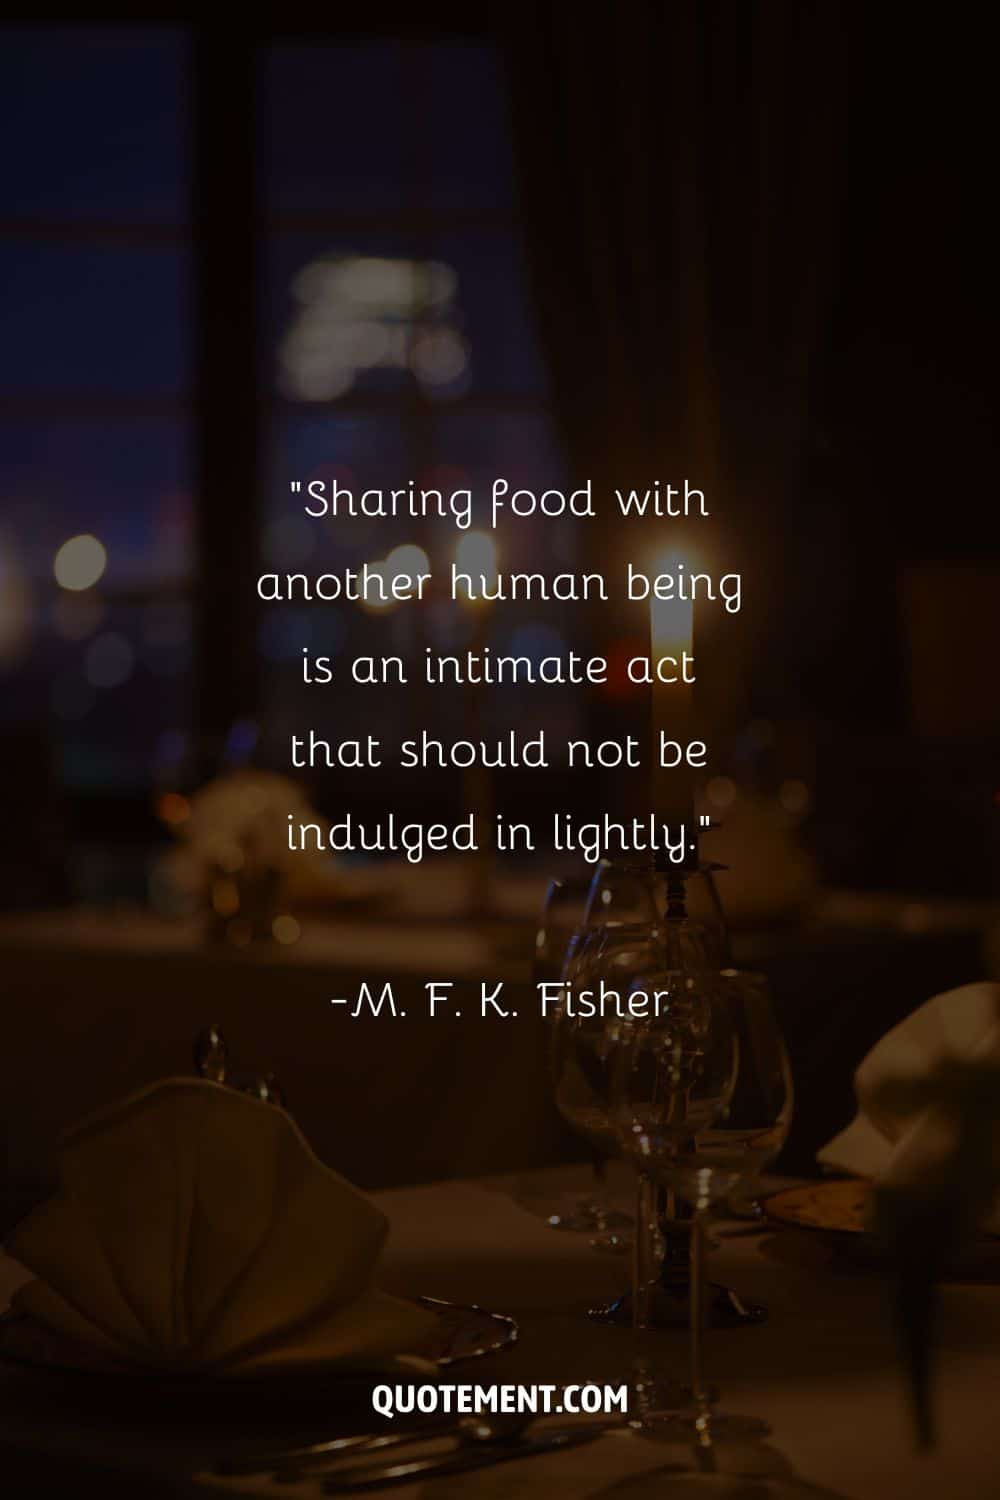 Image of a dinner table representing a food-related quote.